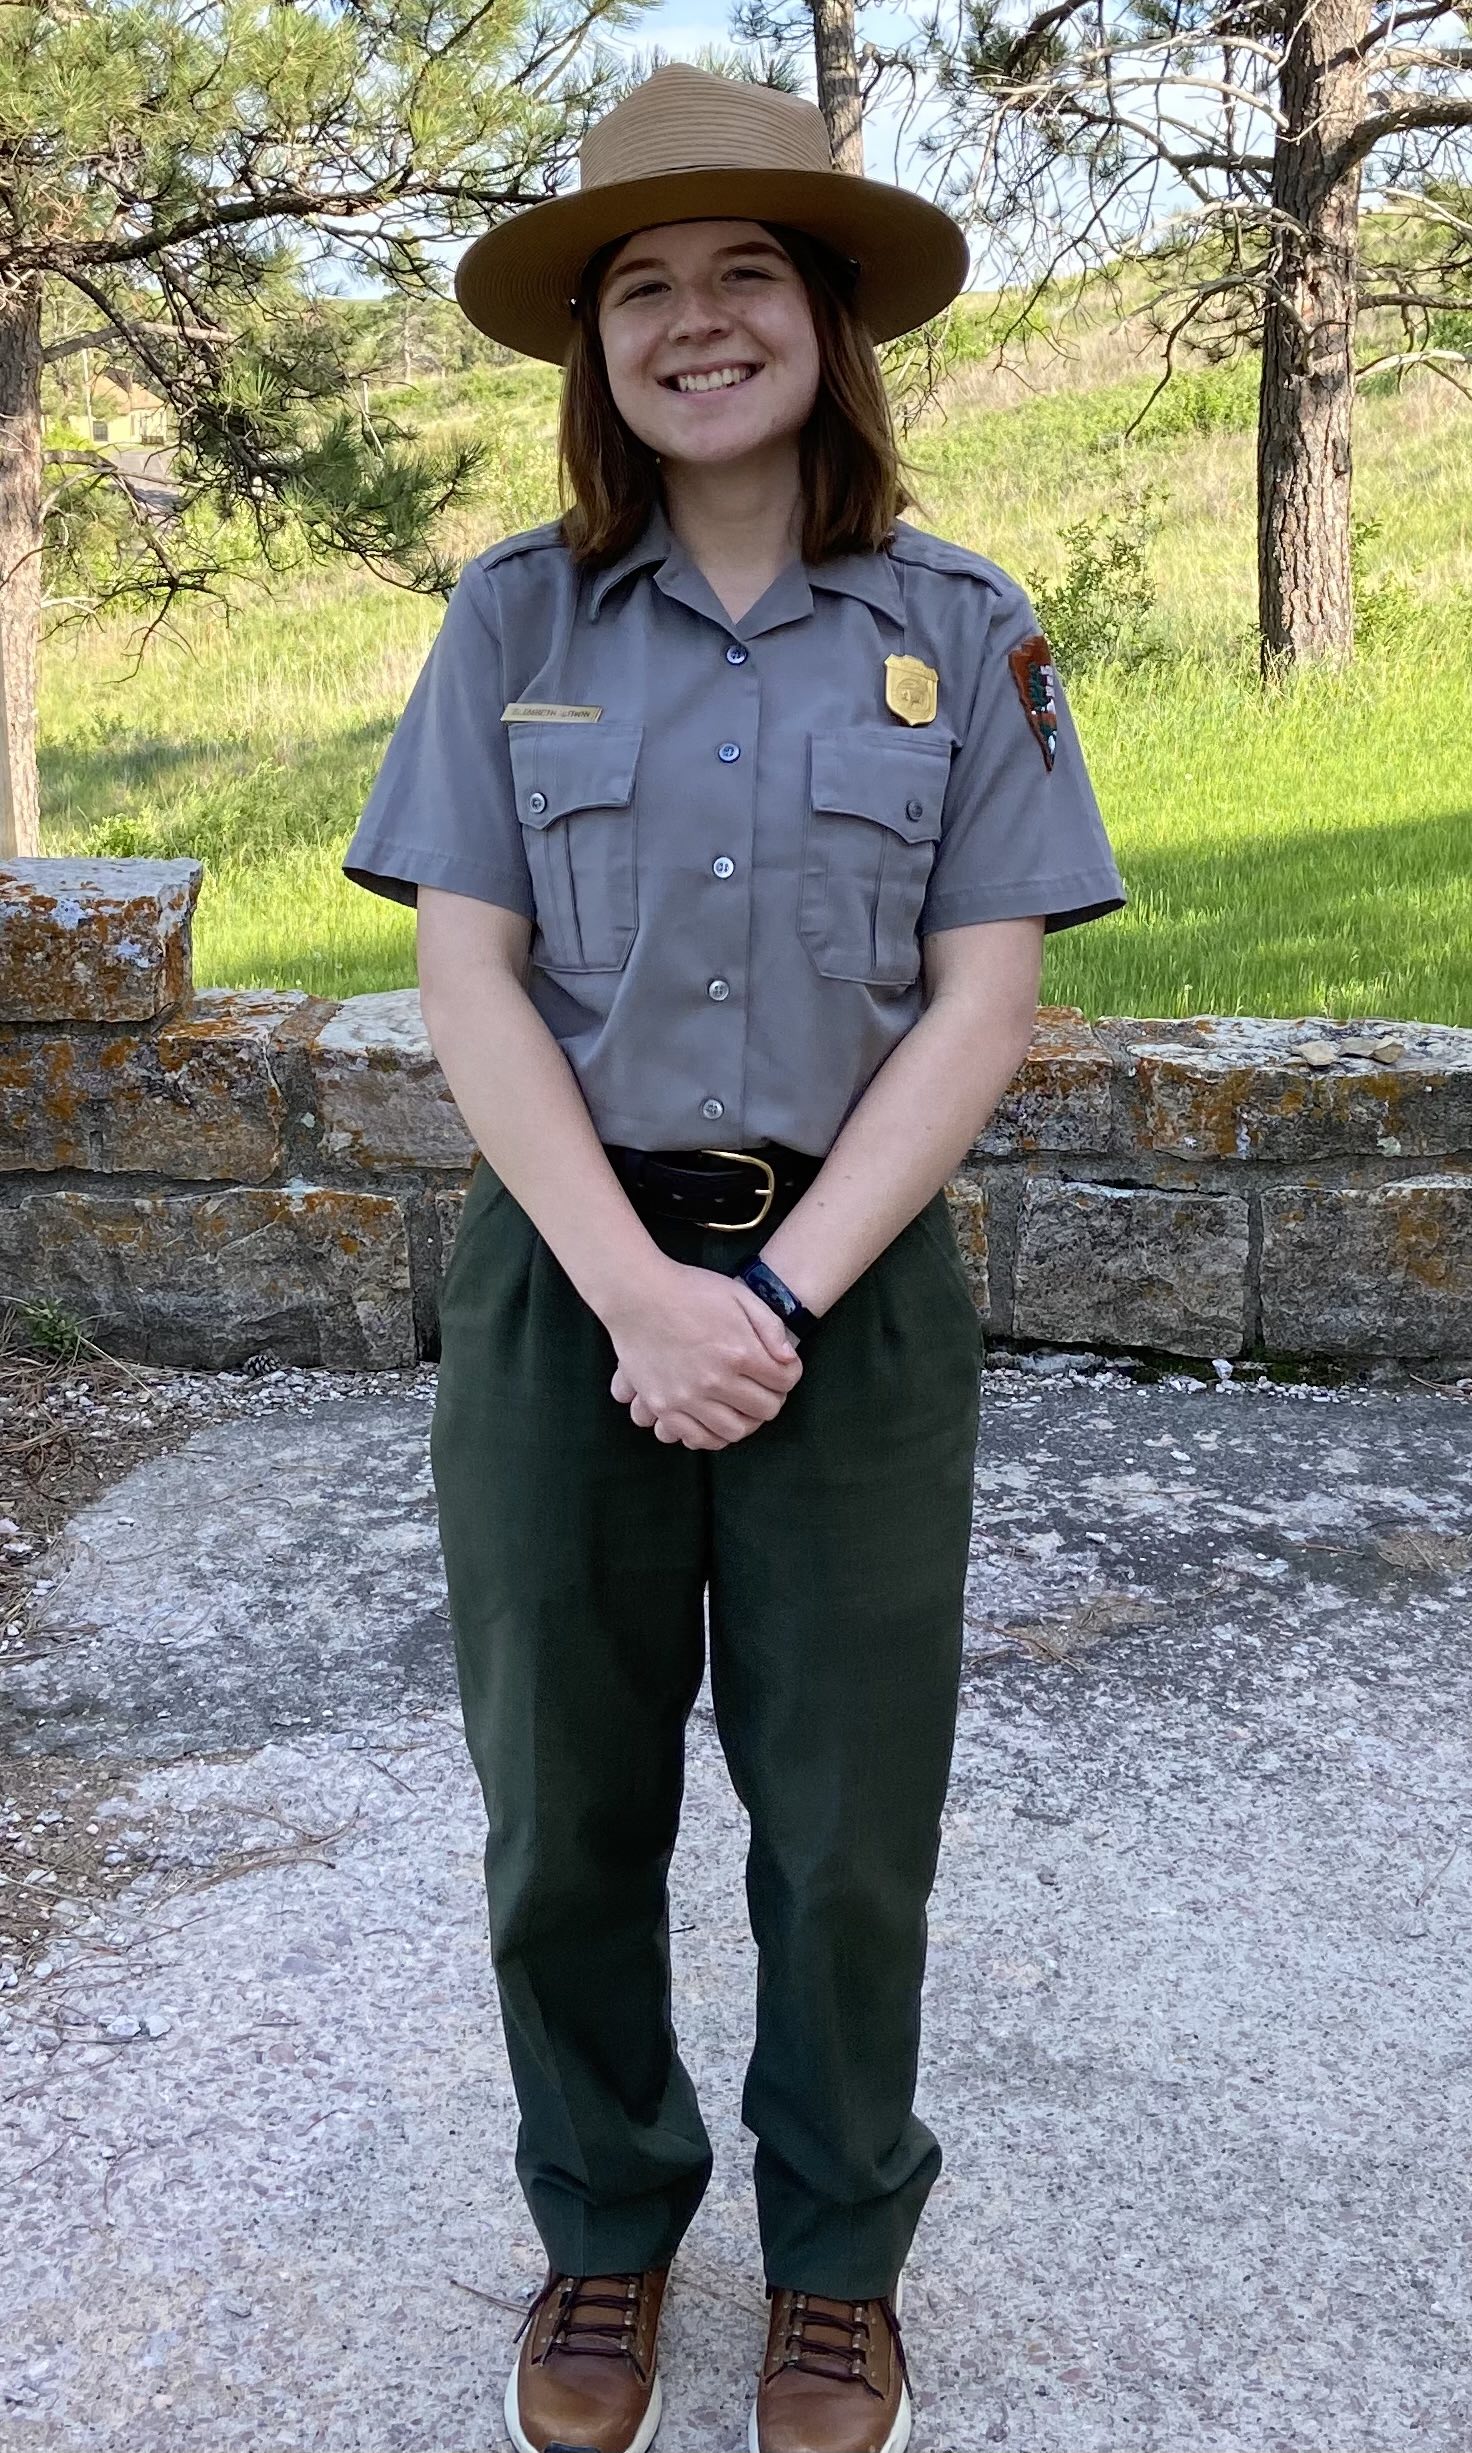 Elizabeth Litwin working as a park ranger at the Wind Cave National Park in the Black Hills of South Dakota.